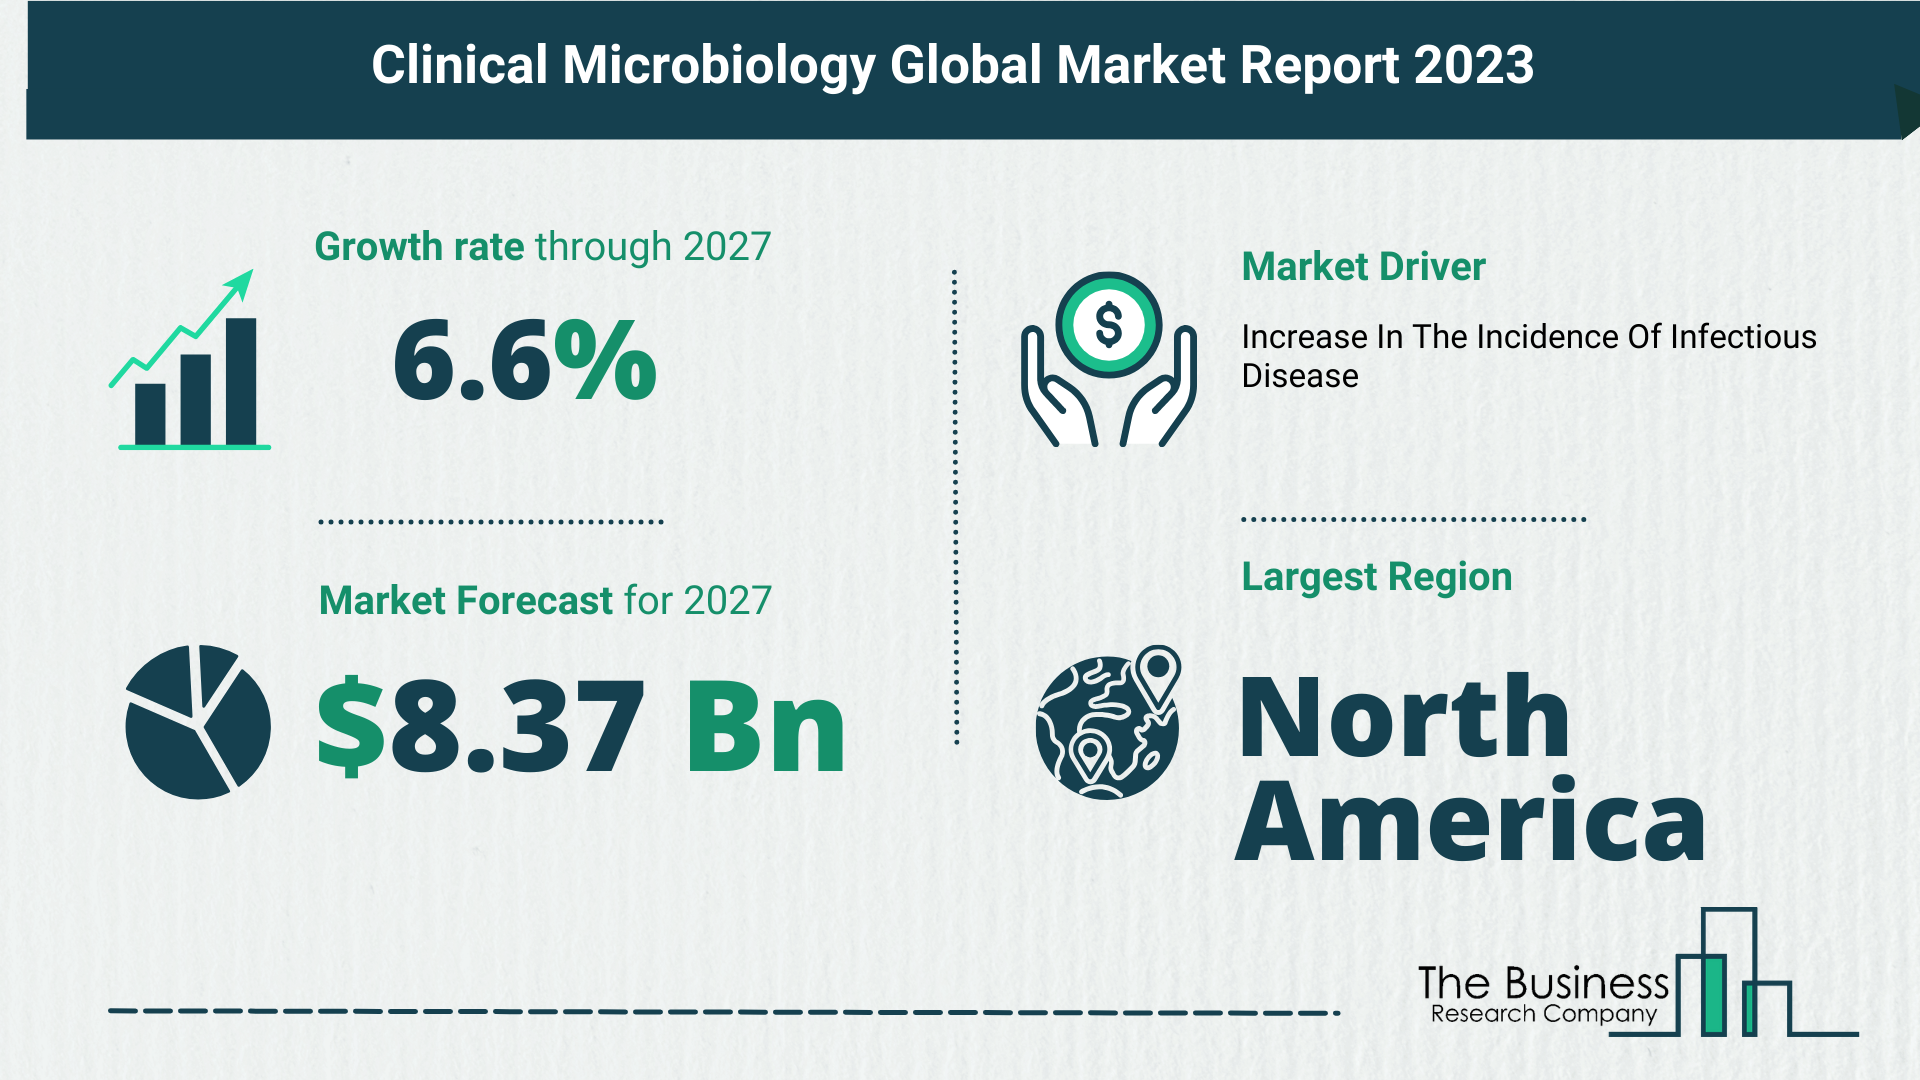 What Is The Forecast Growth Rate For The Clinical Microbiology Market?